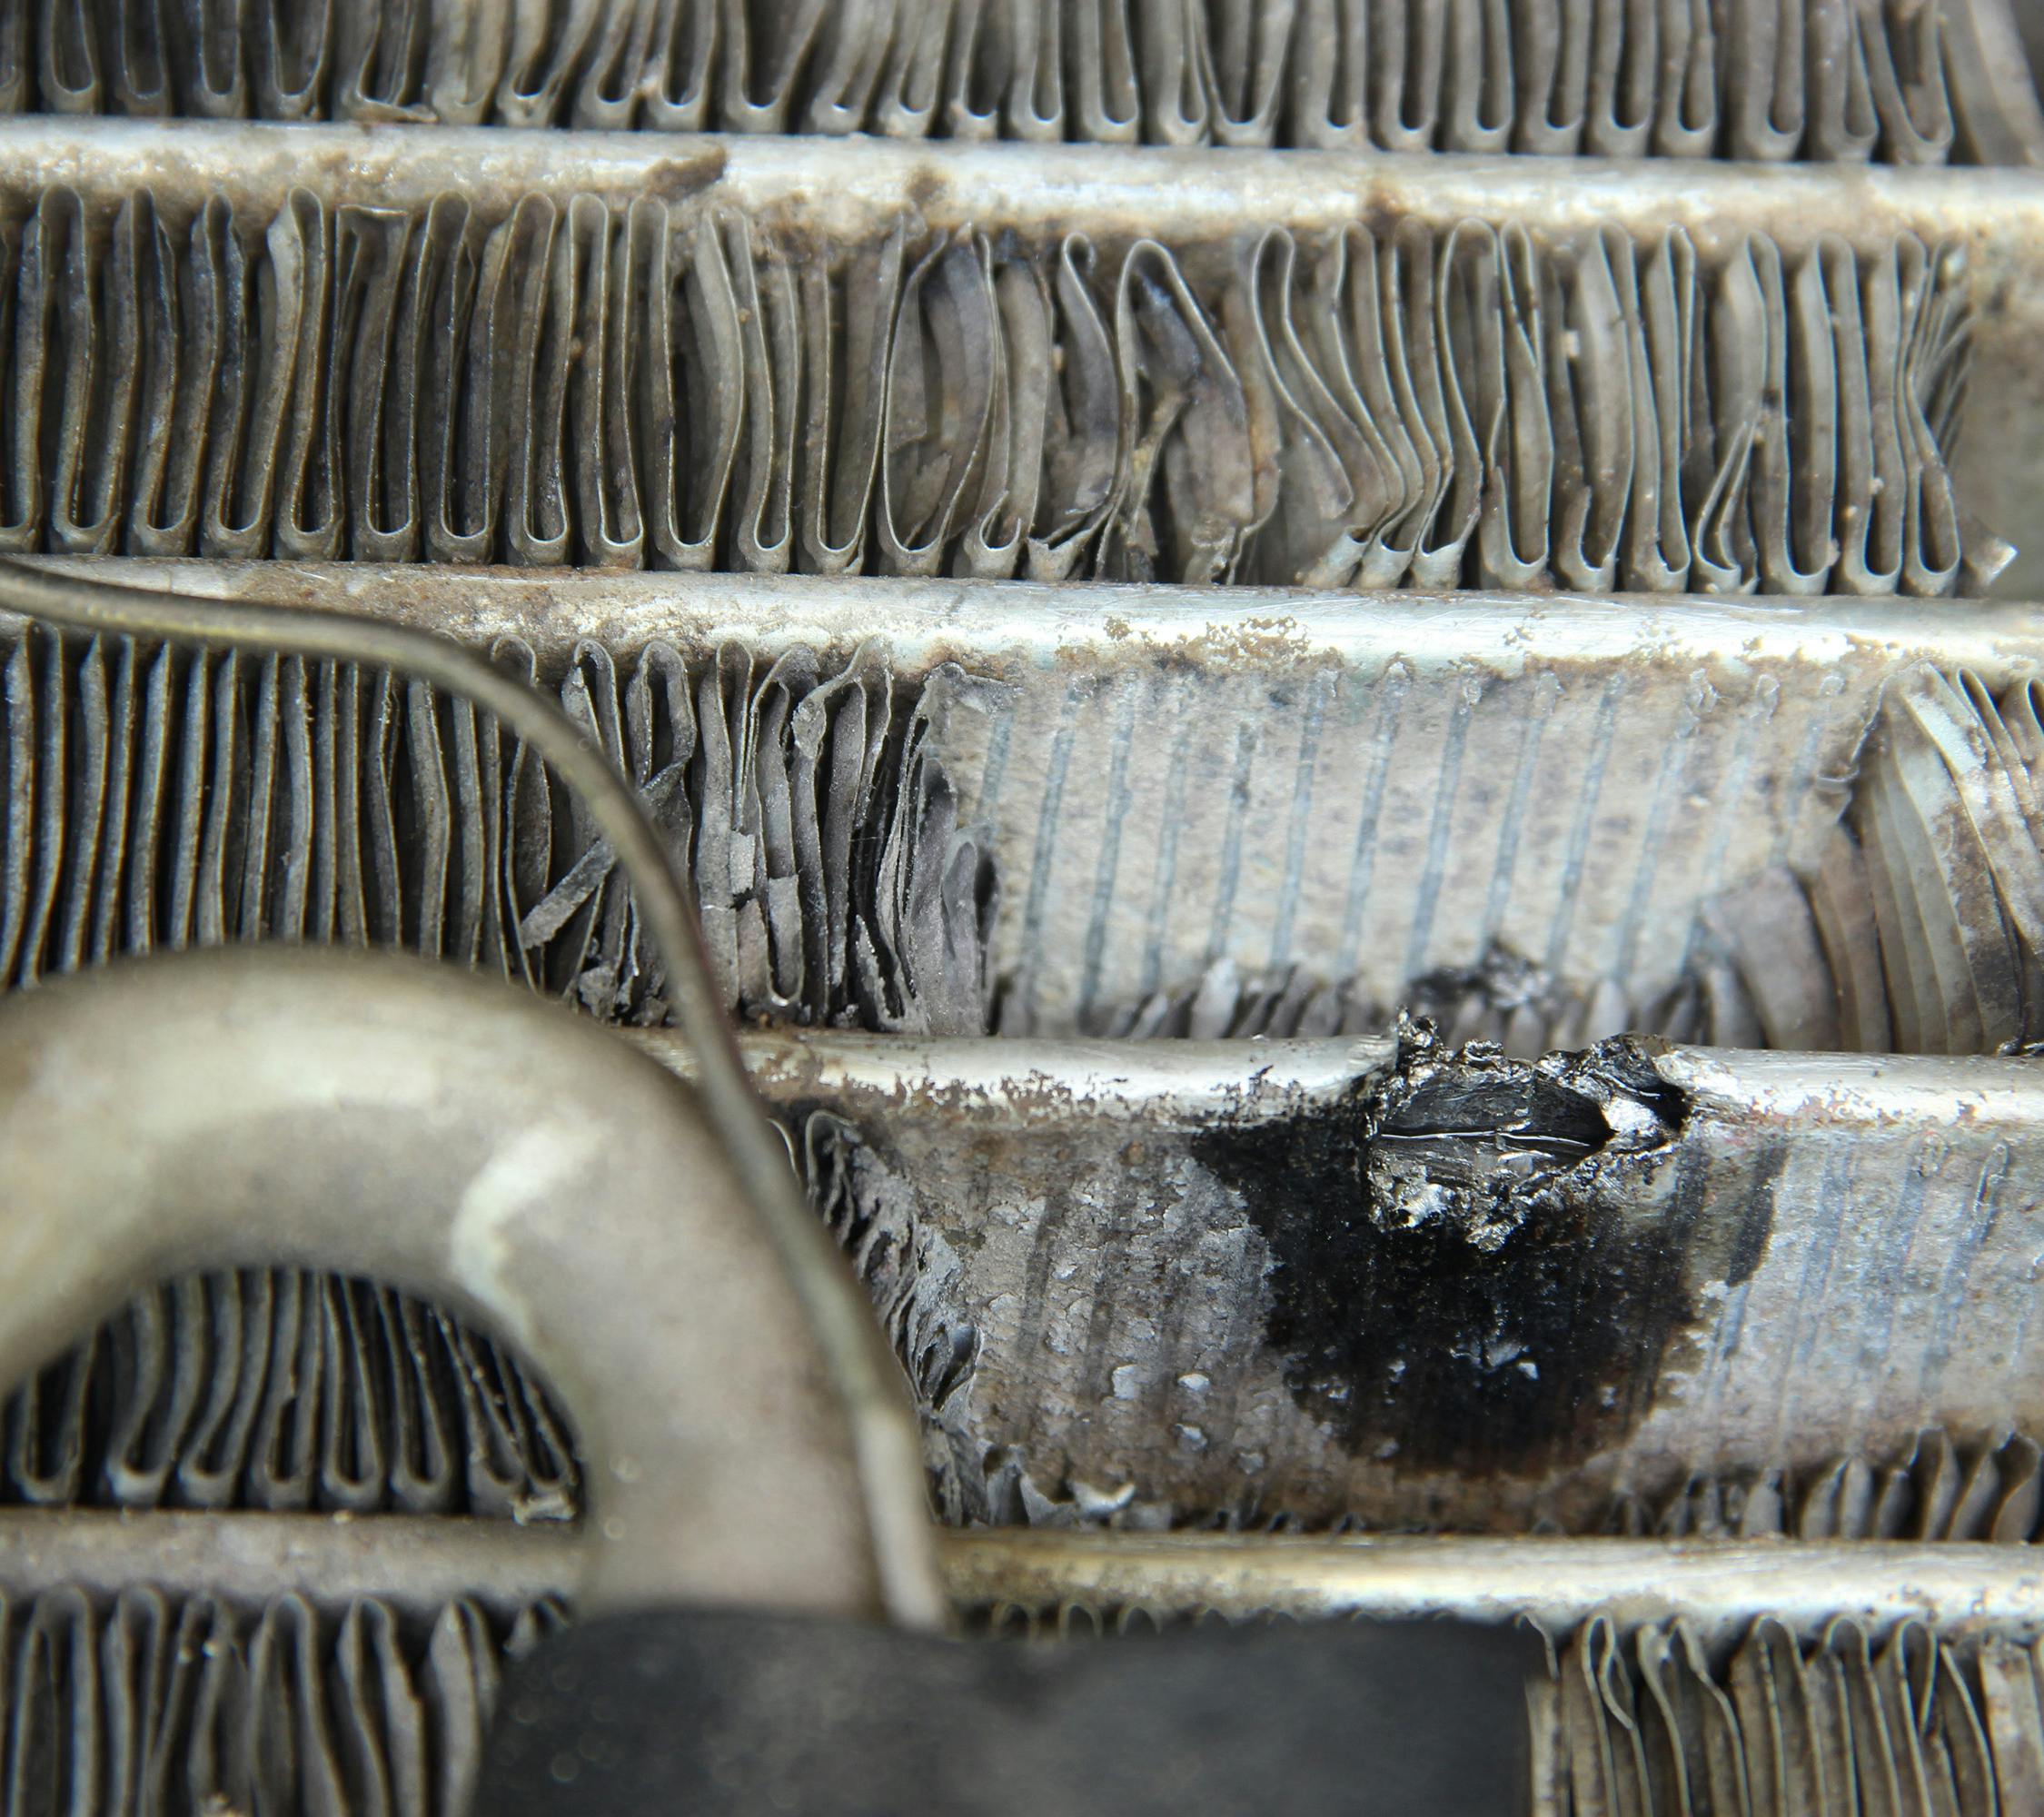 A leaking evaporator from a car air-conditioning system